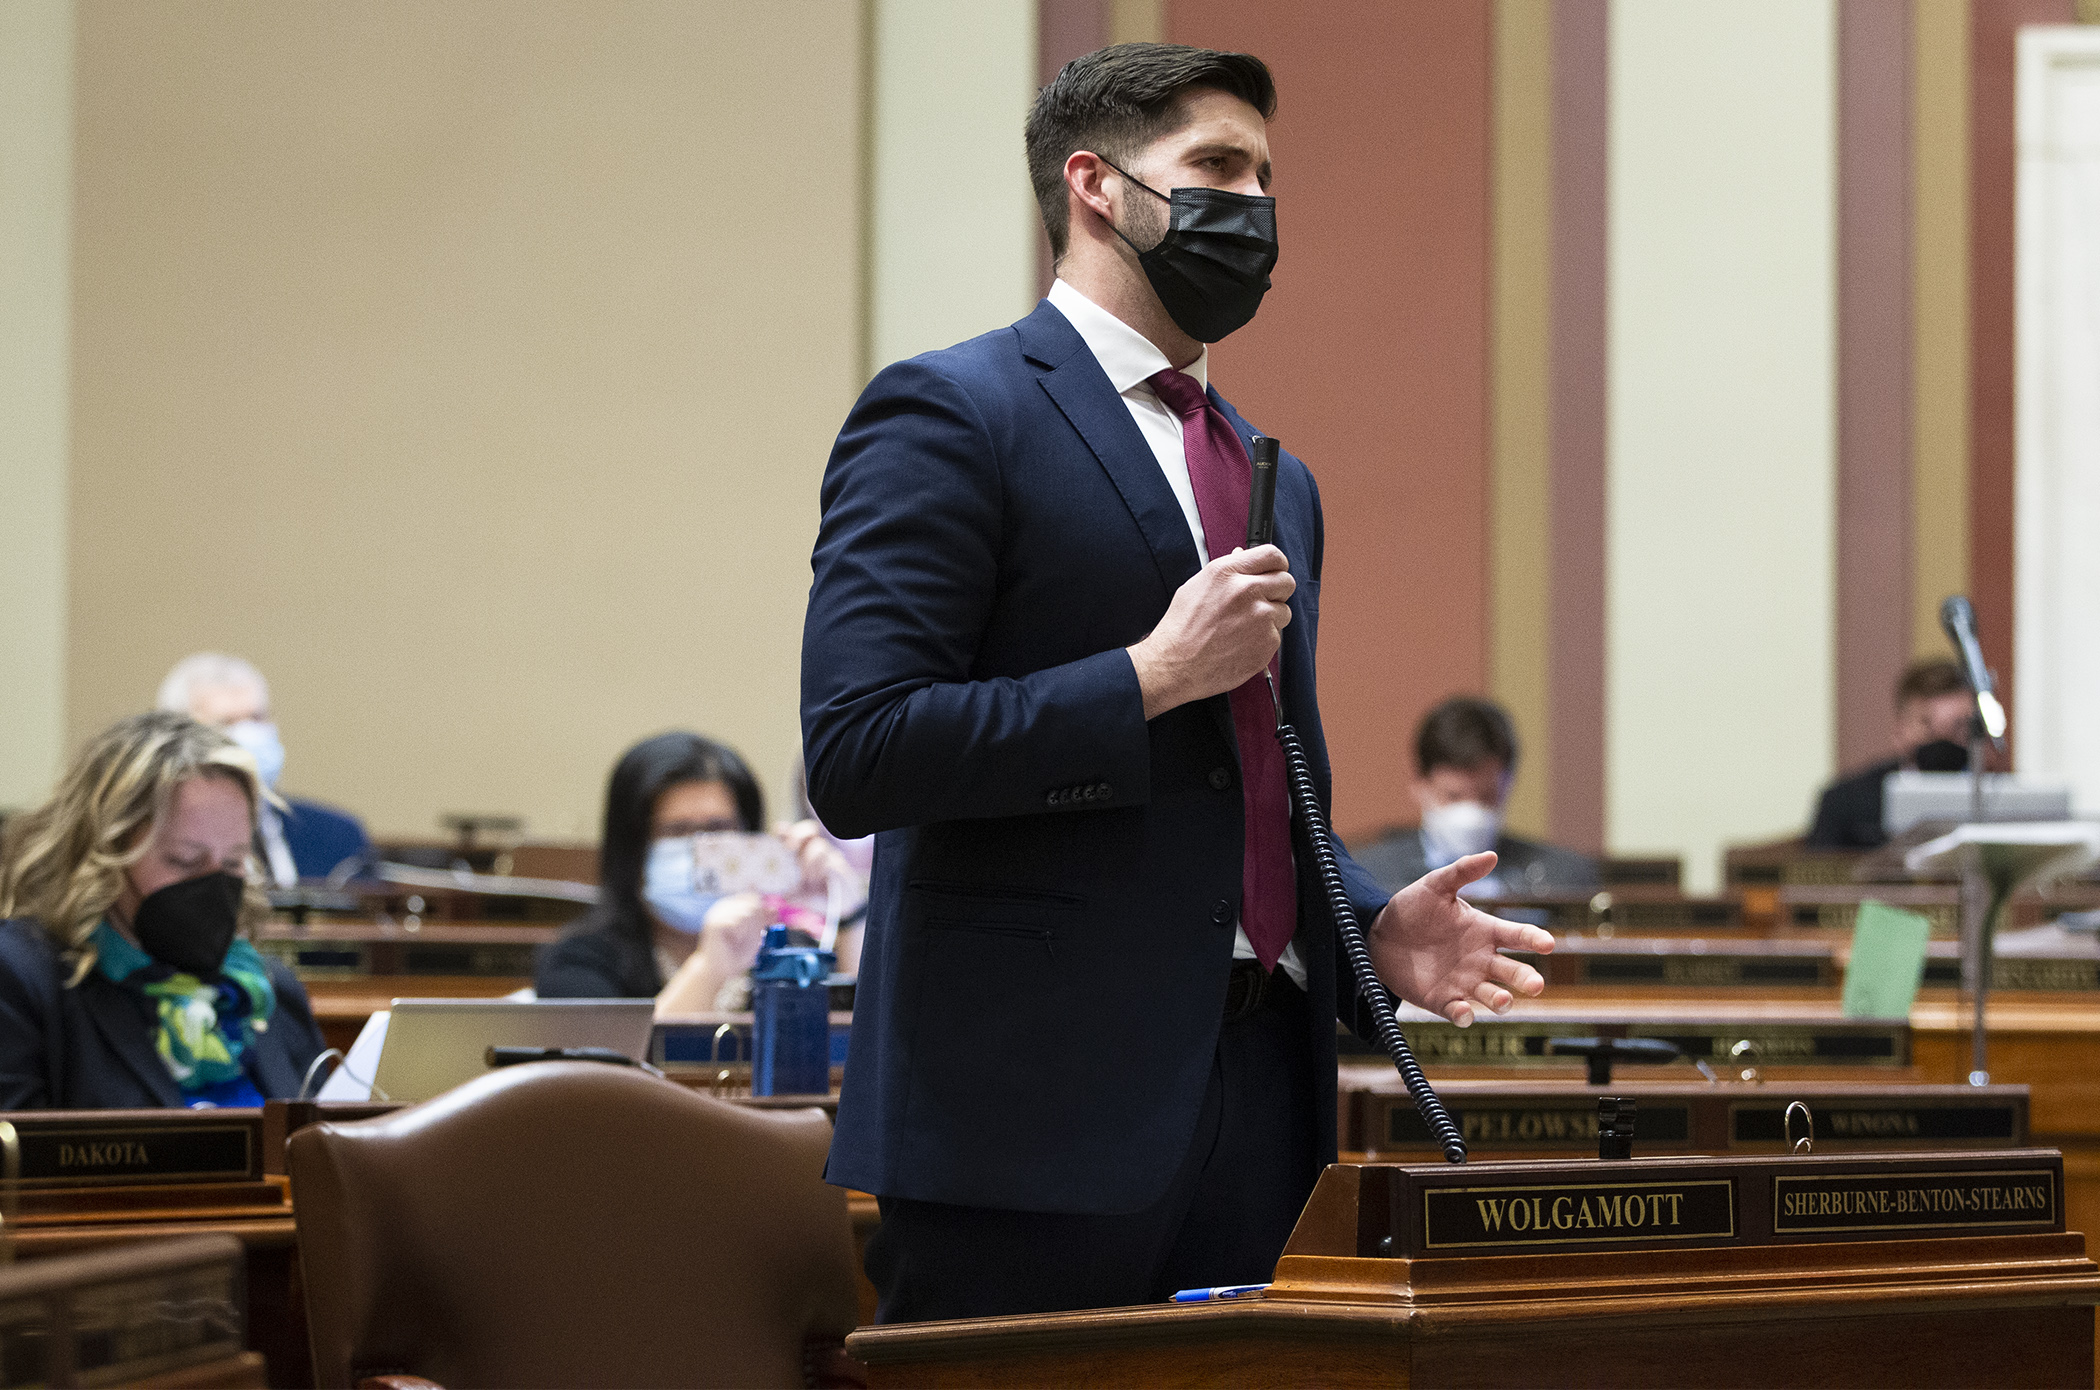 Rep. Dan Wolgamott discusses the first bill to be debated on the House Floor in 2022. HF1203 would, in part, maintain COVID-19 workers’ compensation coverage for eligible frontline workers until May 31, 2023. (Photo by Paul Battaglia)